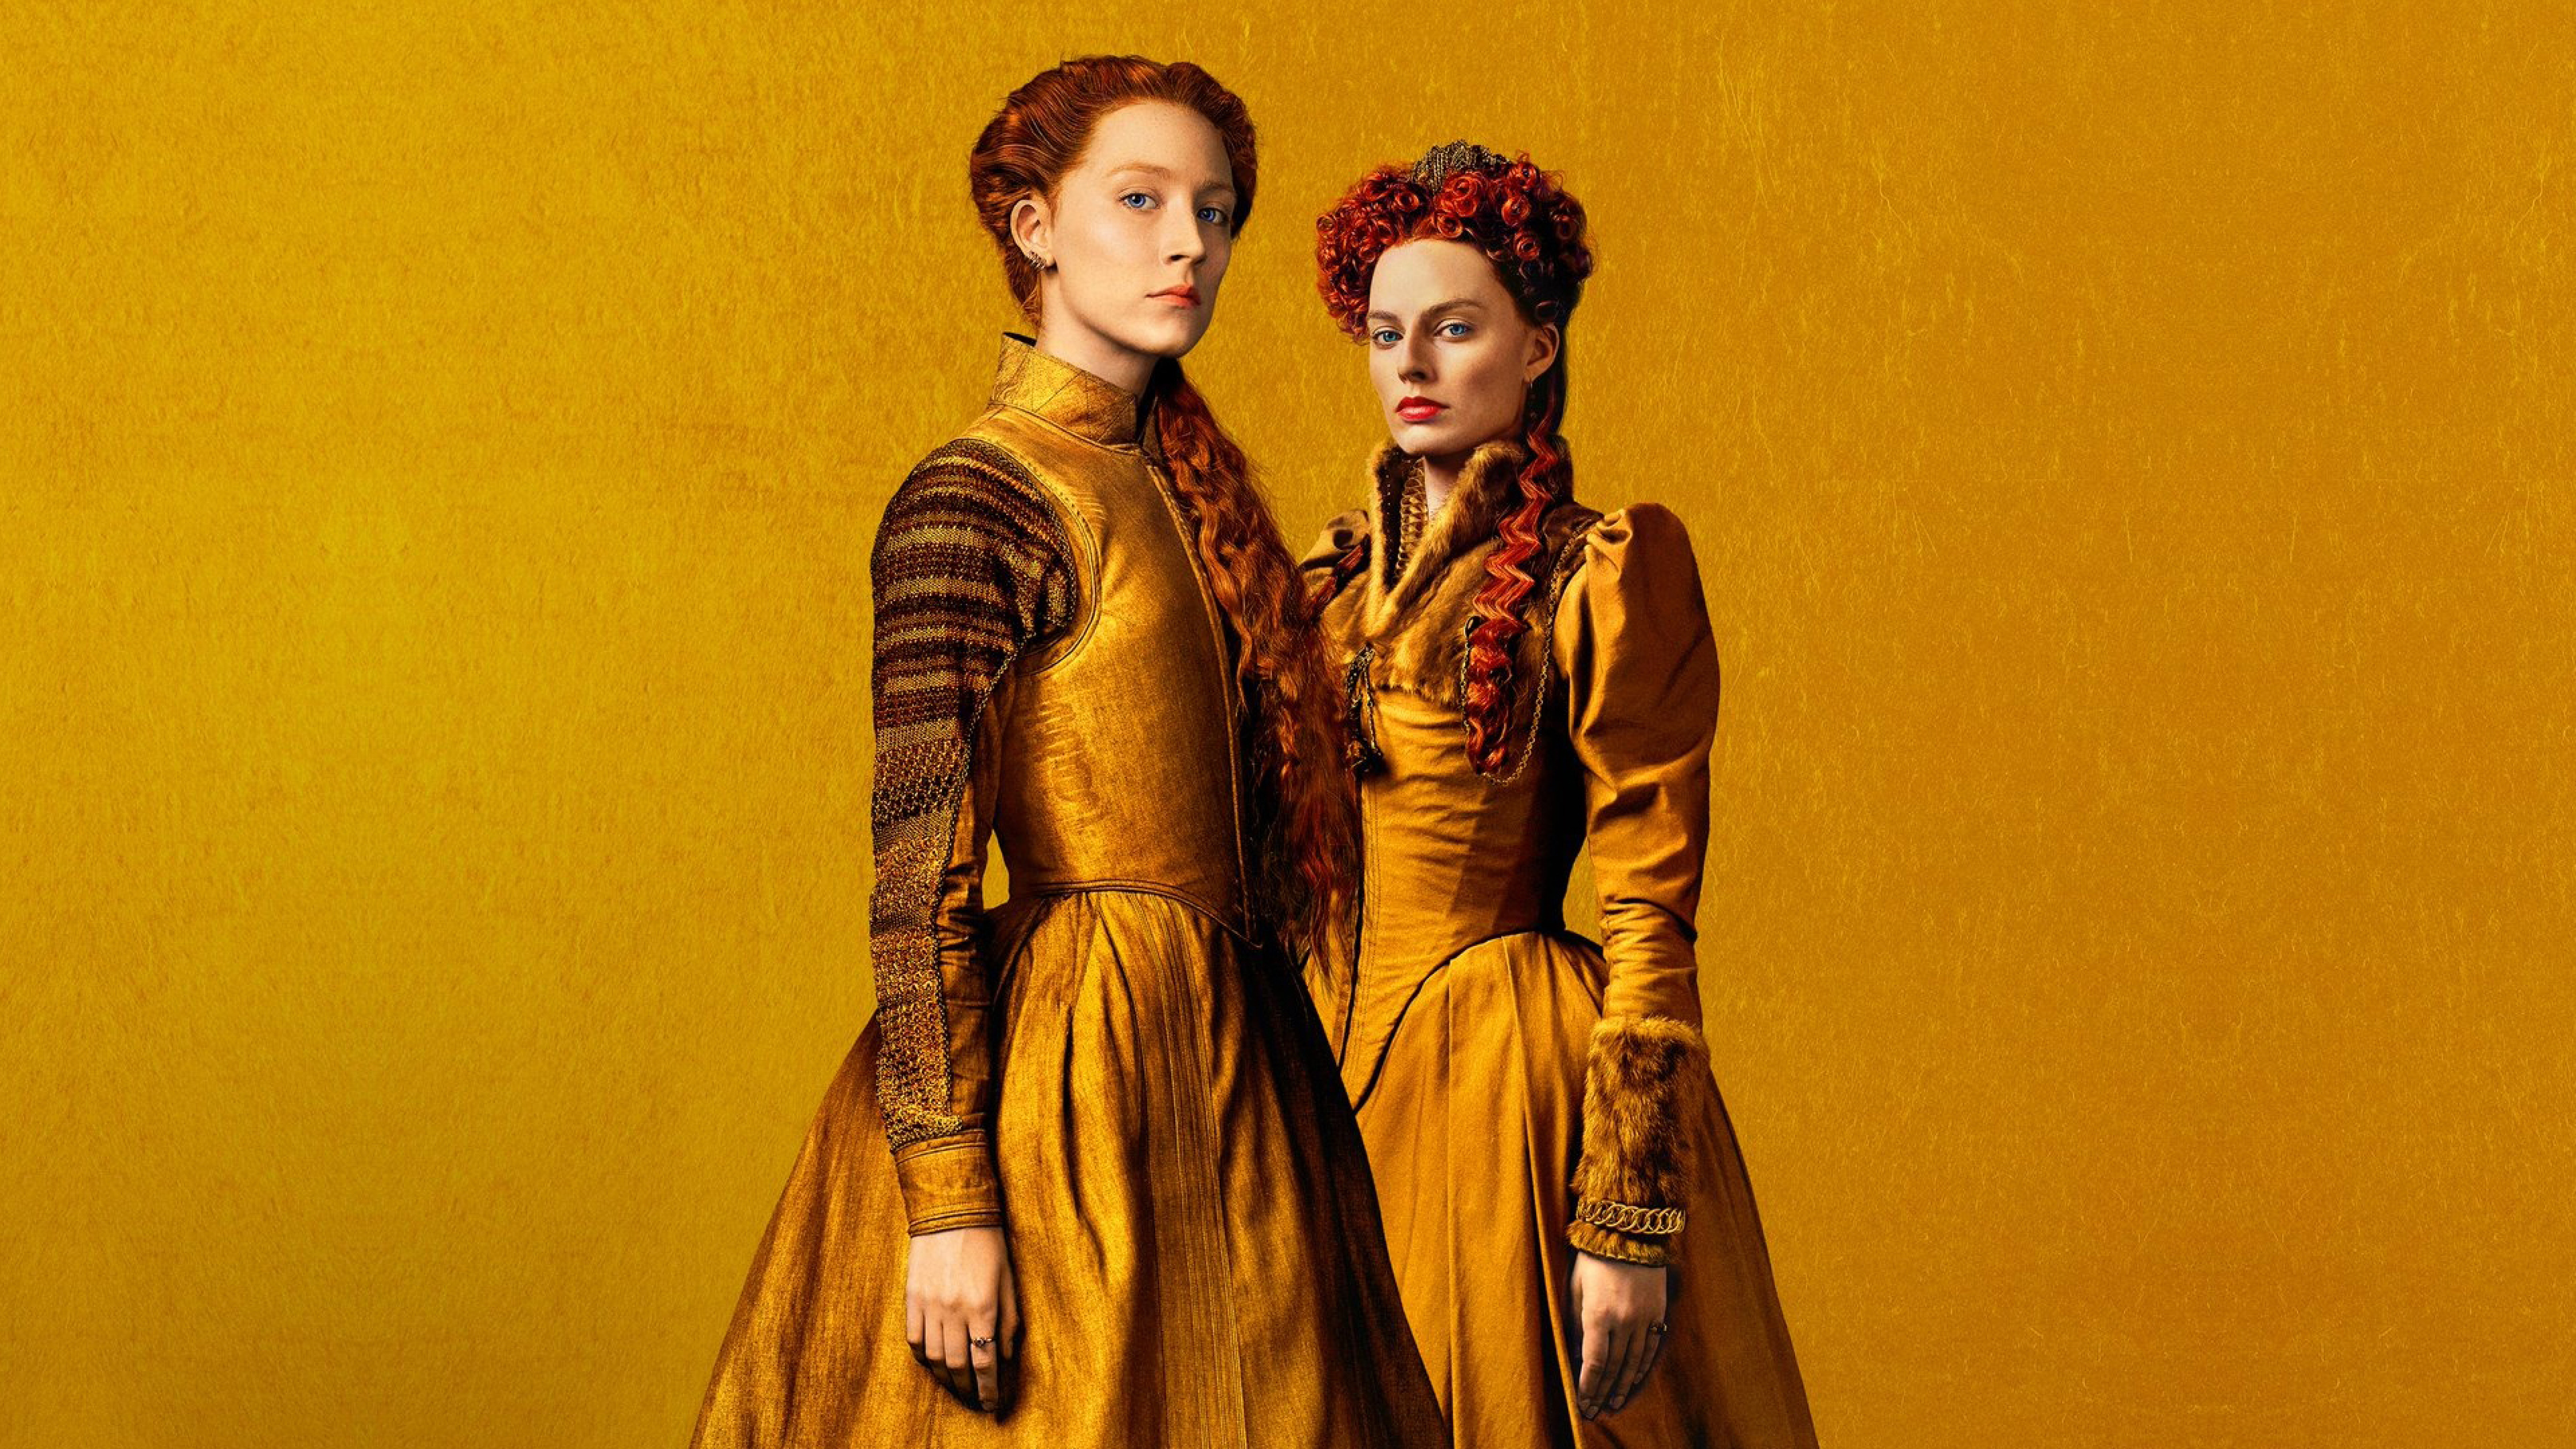 Margot Robbie And Saoirse Ronan In Mary Queen Of Scots